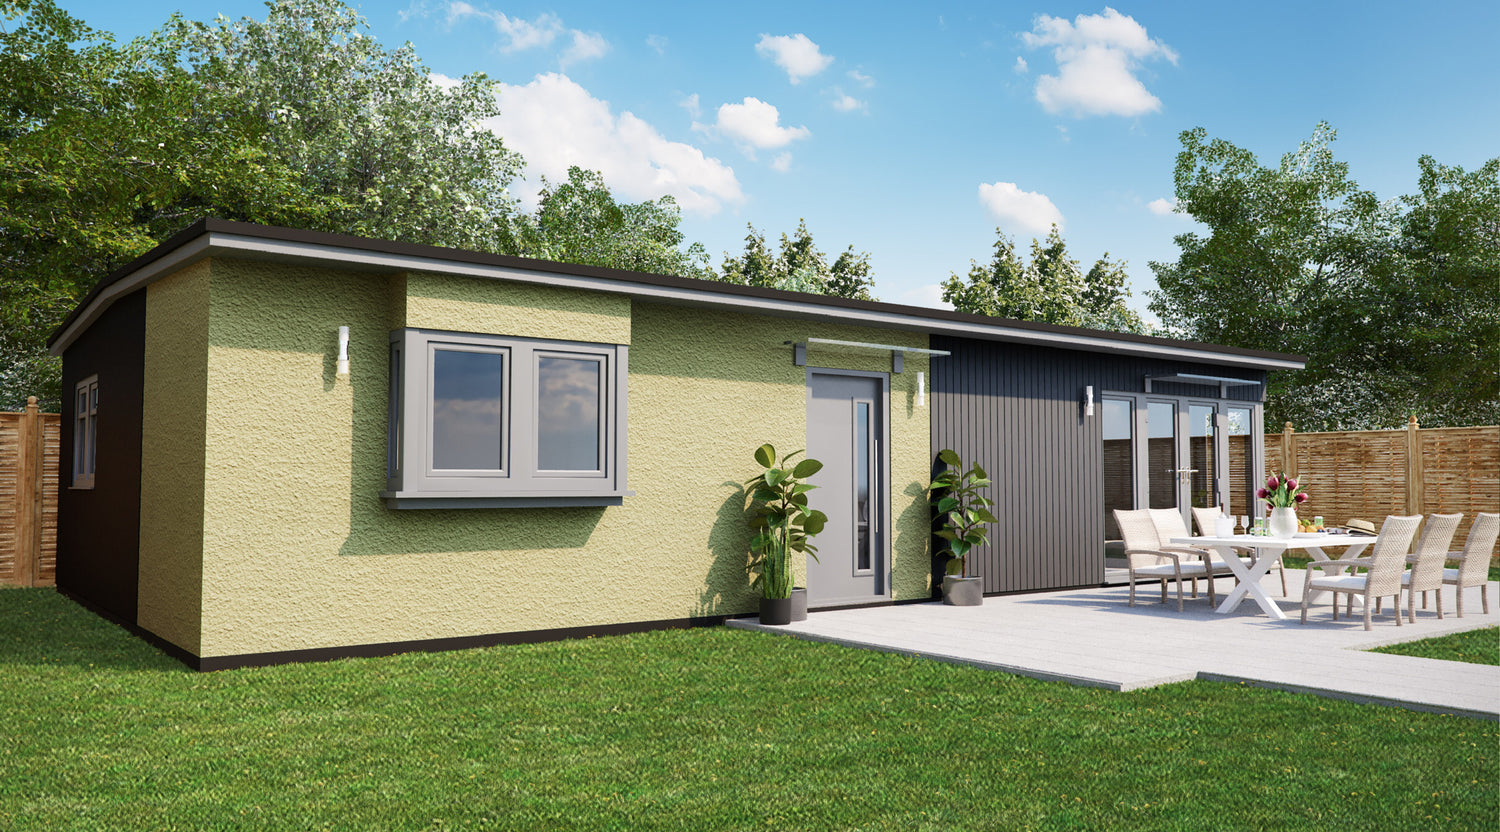 A 3d rendering of a small garden shed.